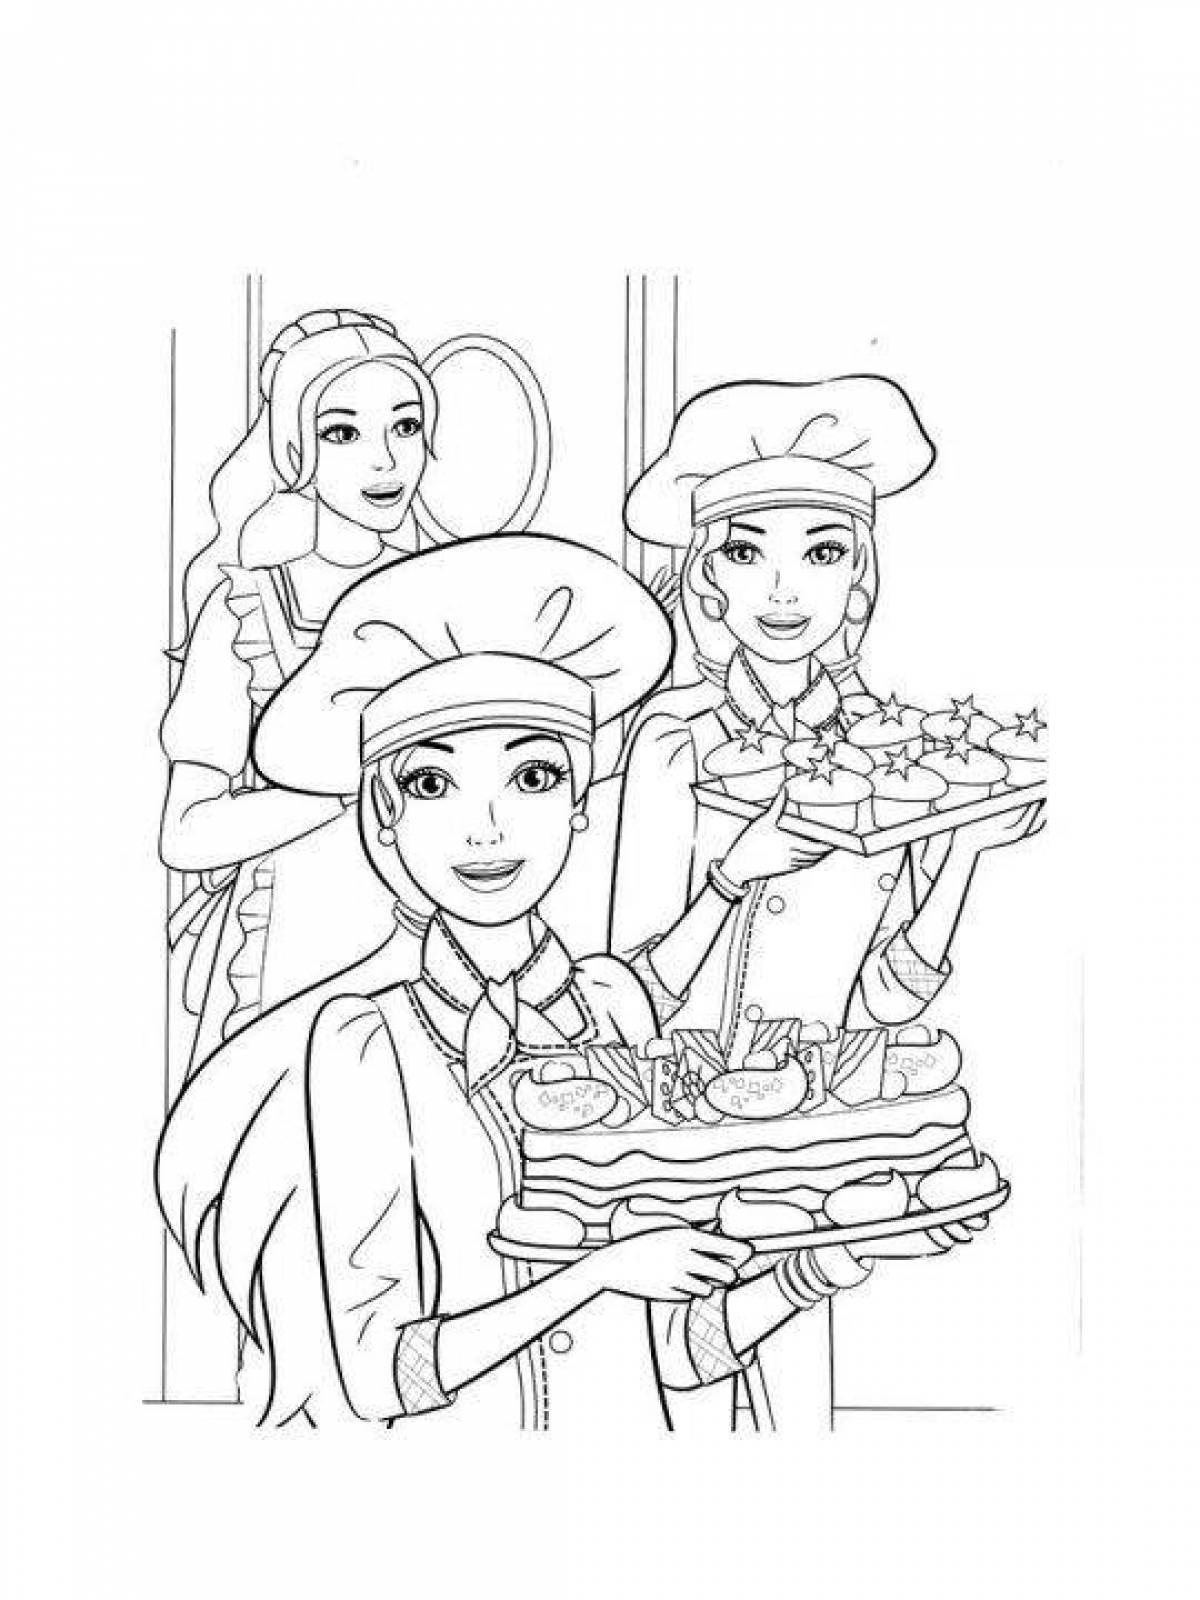 Coloring page sweet confectioner